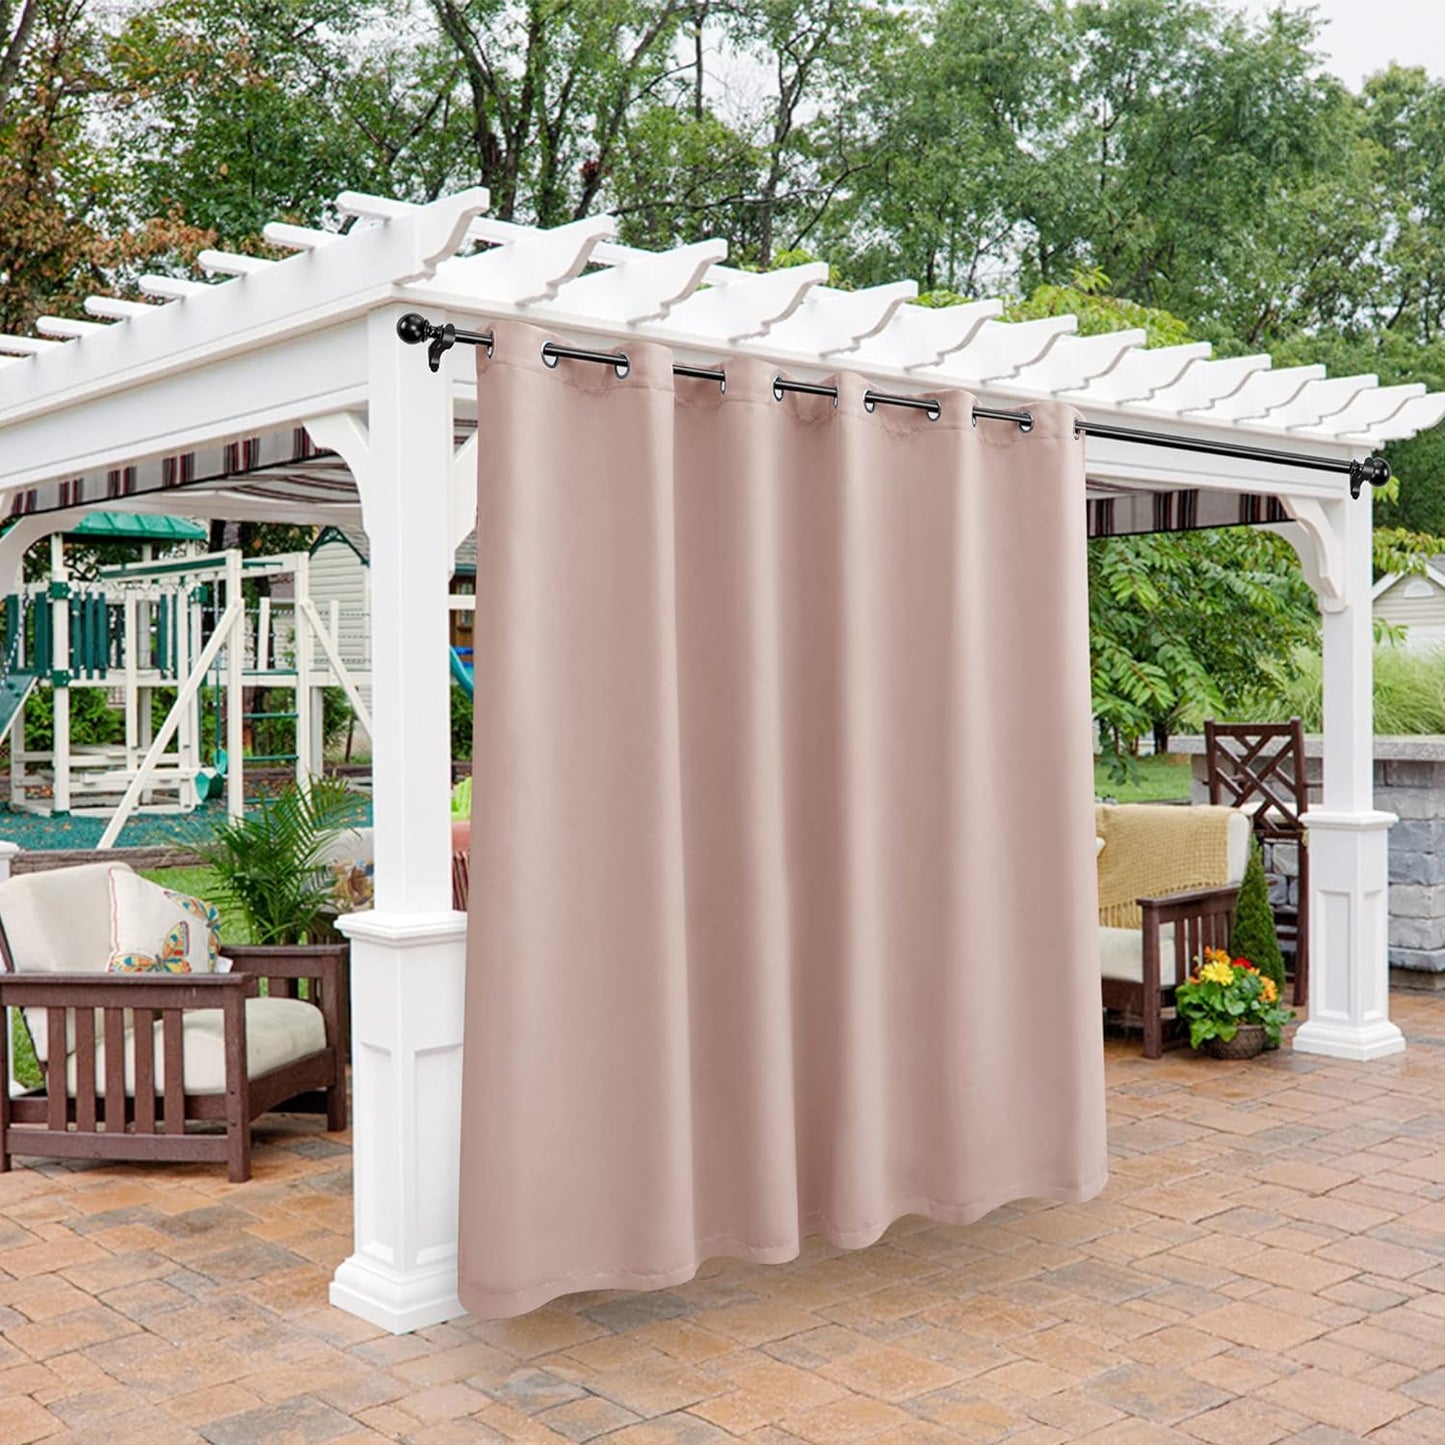 BONZER Outdoor Curtains for Patio Waterproof - Light Blocking Weather Resistant Privacy Grommet Blackout Curtains for Gazebo, Porch, Pergola, Cabana, Deck, Sunroom, 1 Panel, 52W X 84L Inch, Silver  BONZER Blush 100W X 108 Inch 